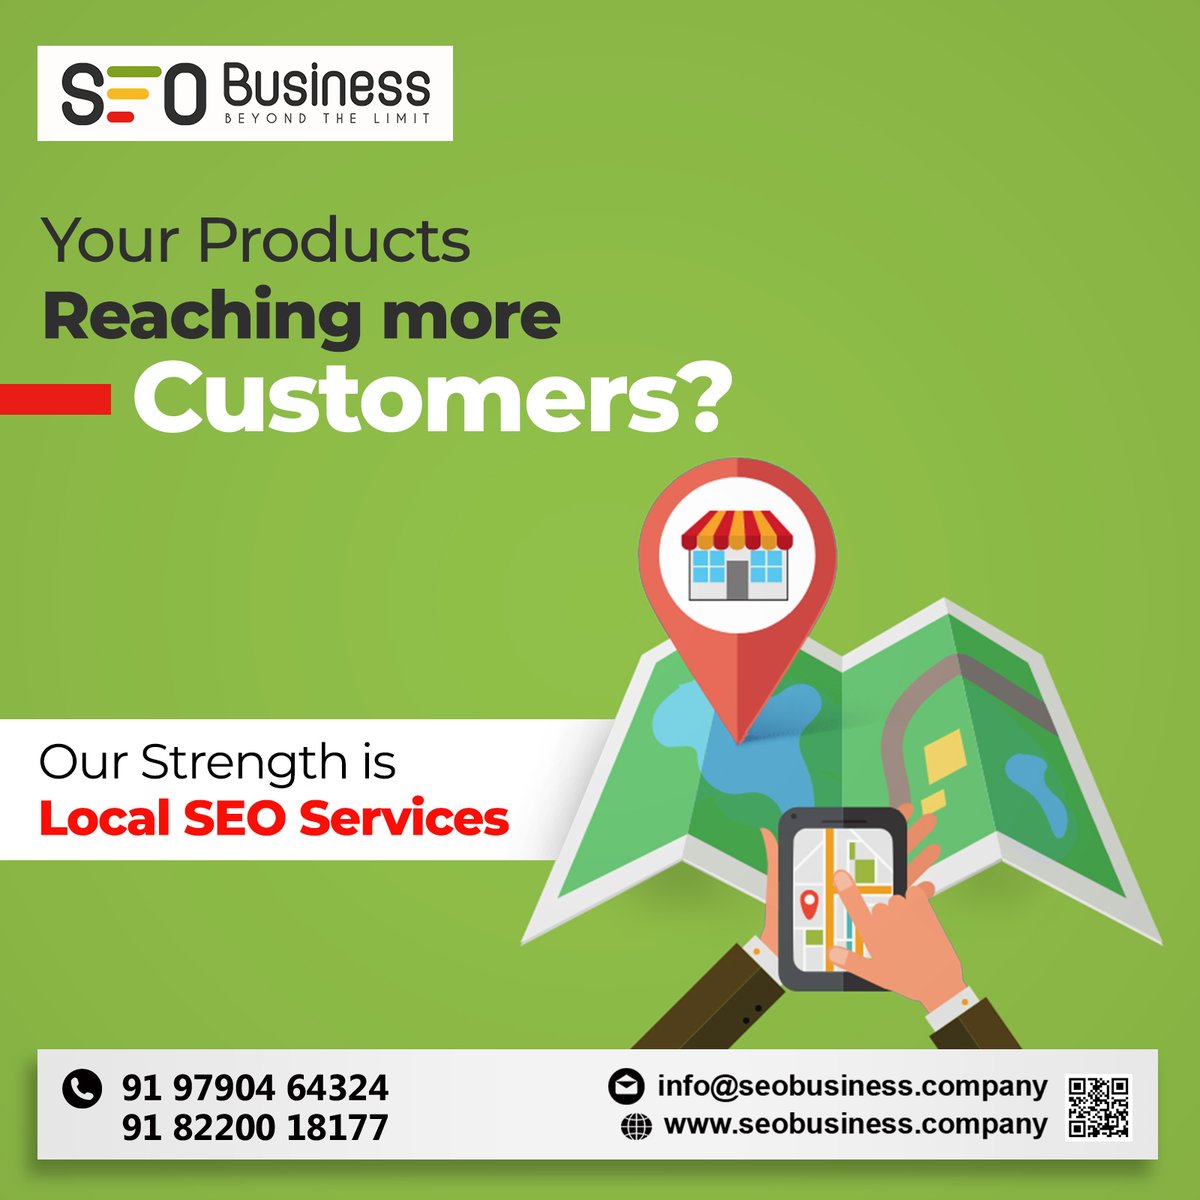 Reach your products more local customers - Local SEO service
#seobusinesscompany #seoservices #SEOAgency  #localseo #localseotips #localseorank #localseoagency #localseoexpert #localseocompany #localseoservices #localseomarketing  #Google  #localbusiness  #WorldConsumerRightsDay